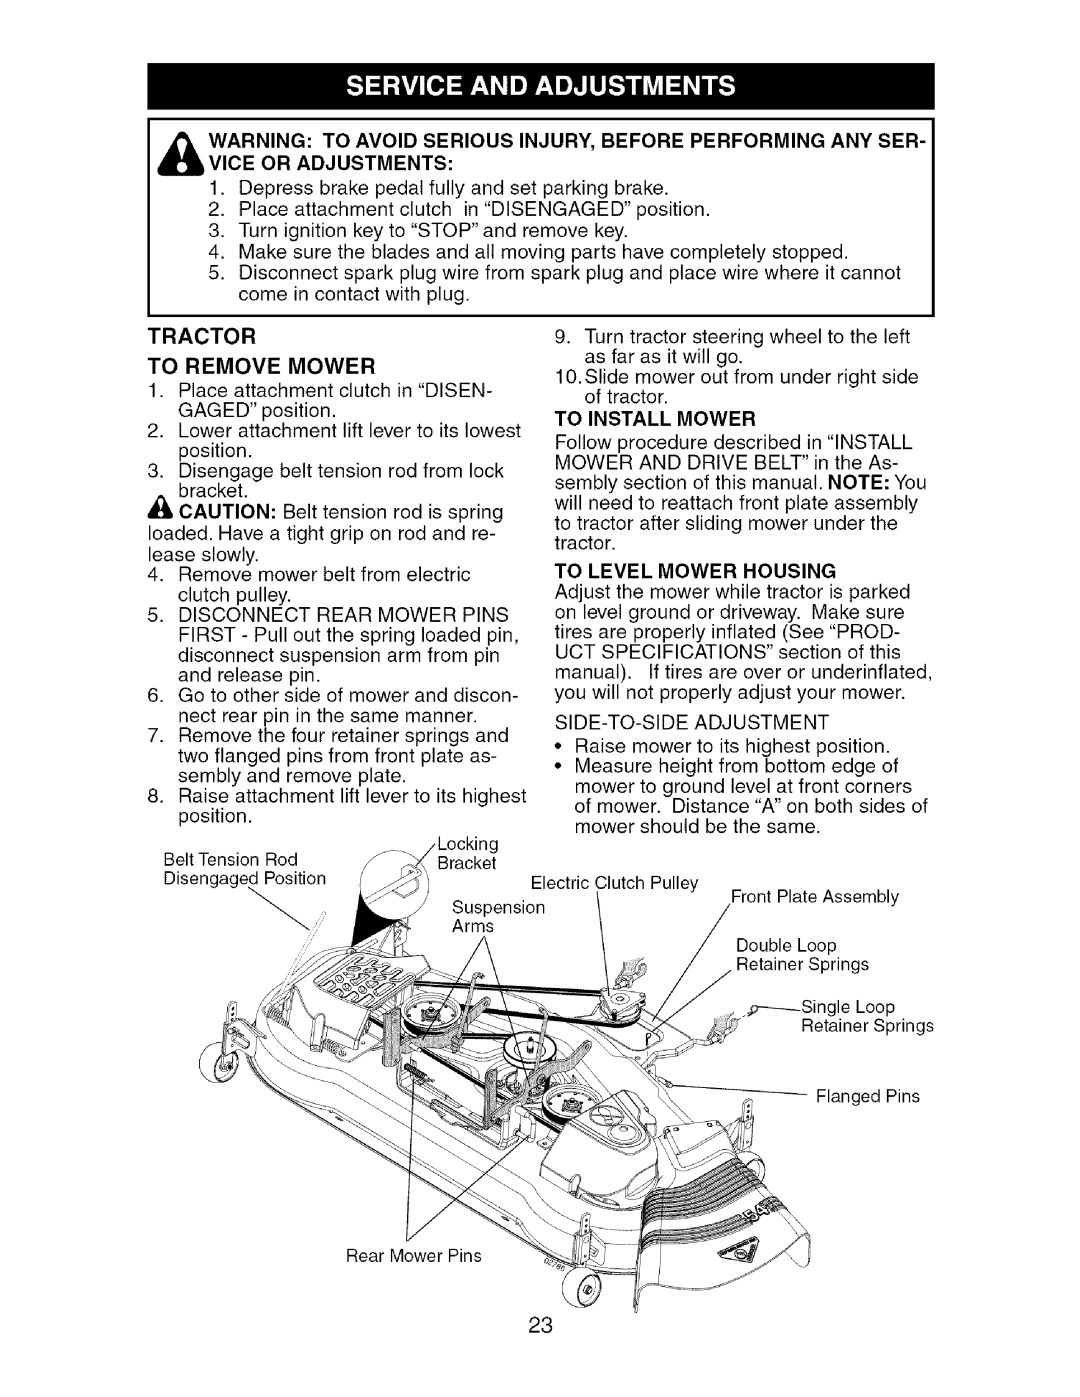 Craftsman 917.27624 owner manual To Remove Mower, To Install Mower, To Level Mower Housing, SIDE-TO-SIDE Adjustment 